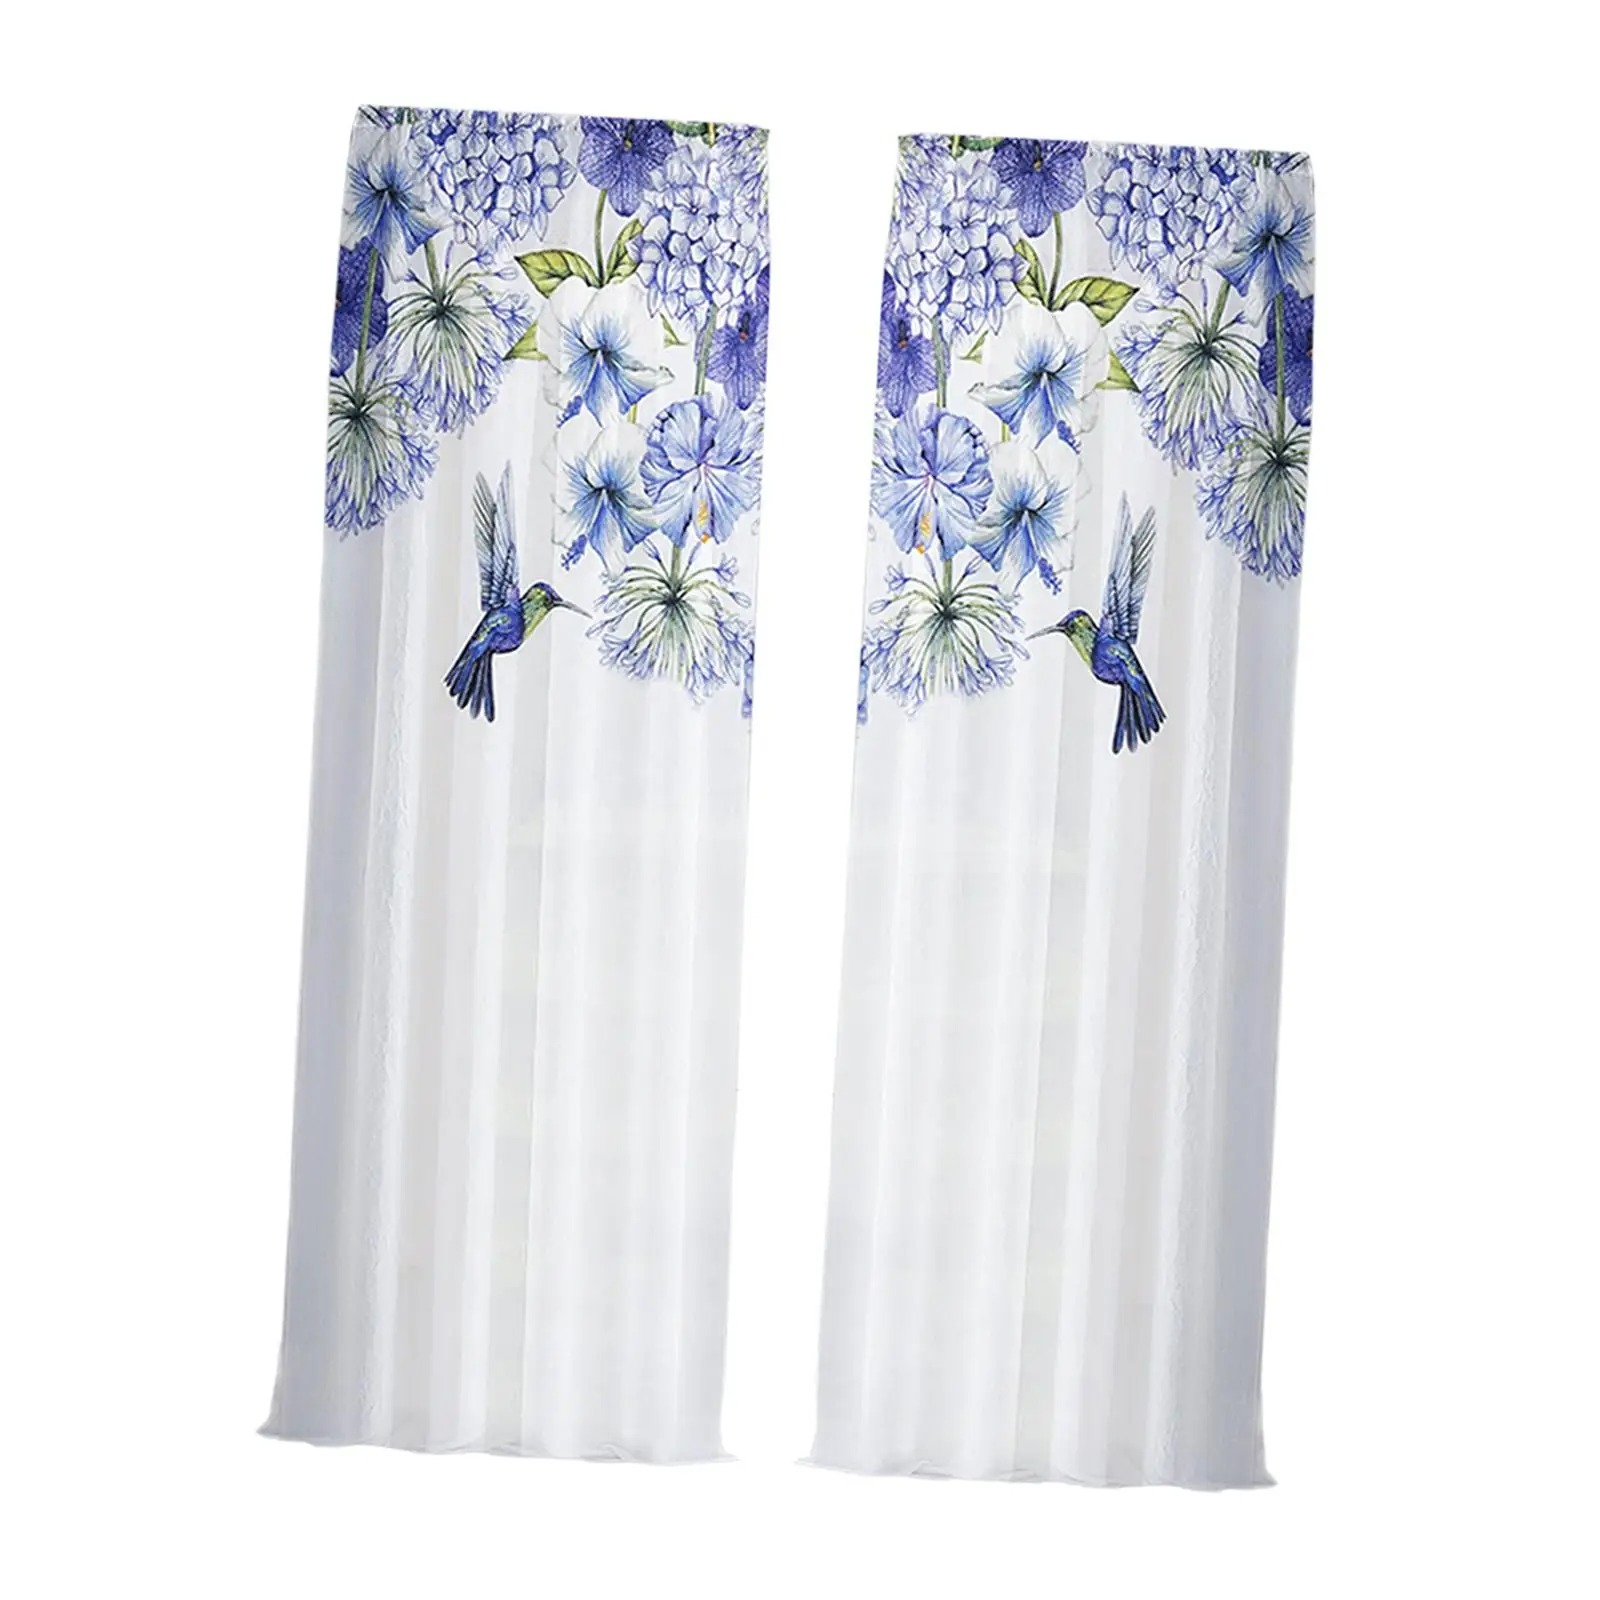 

Birds and Flowers Digital Printing Sheer Curtain Lightweight Easily Install and Slide Privacy Drapes for Living Room Decoration